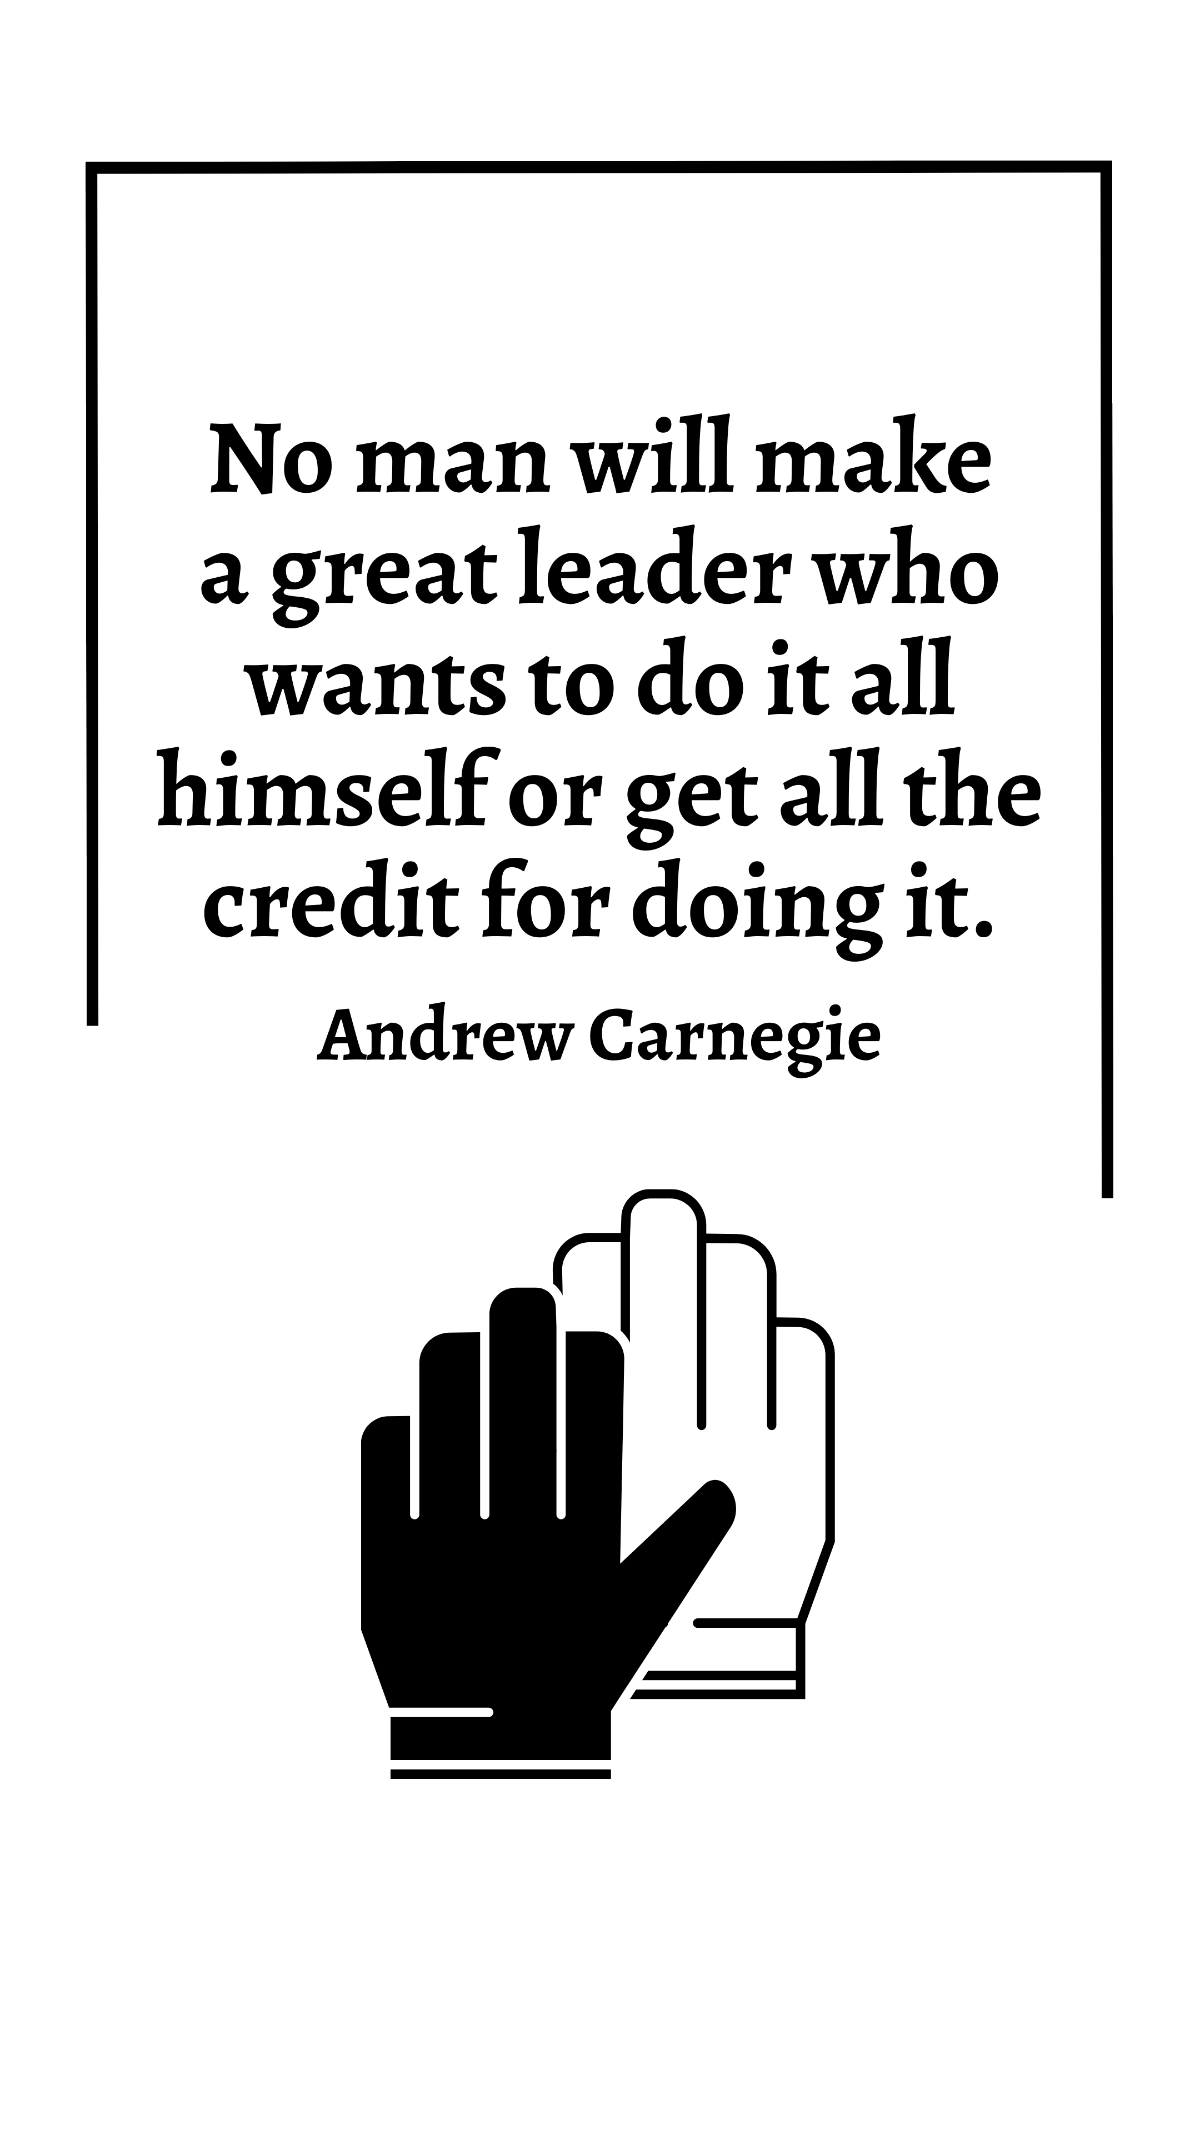 Andrew Carnegie - No man will make a great leader who wants to do it all himself or get all the credit for doing it. Template